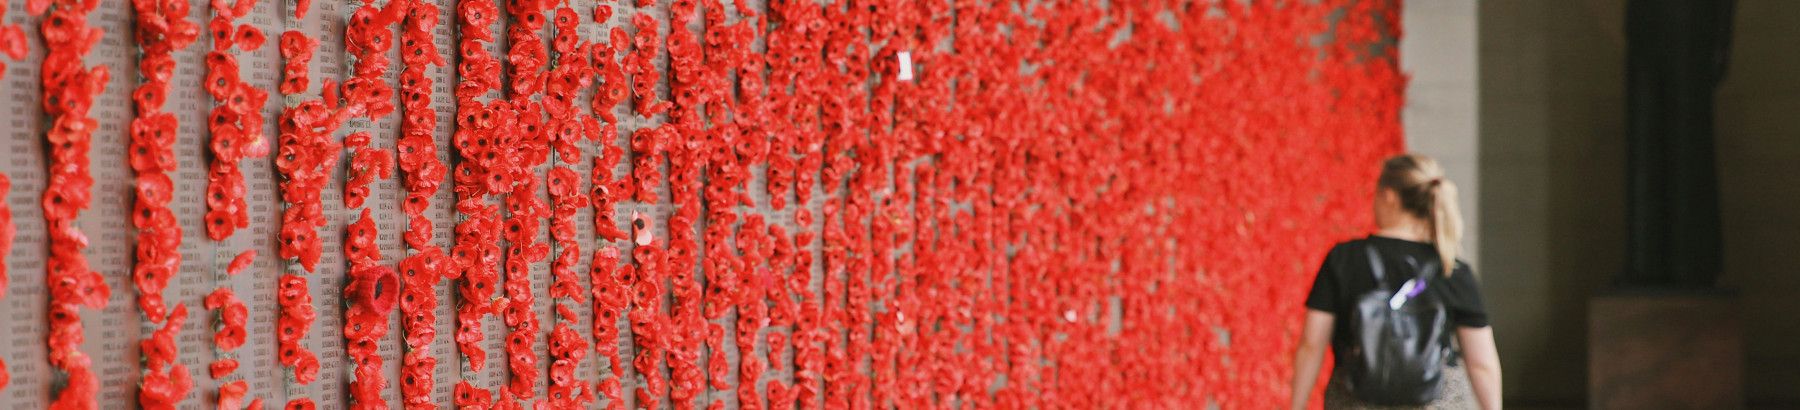 A person walking past a memorial wall with poppies.